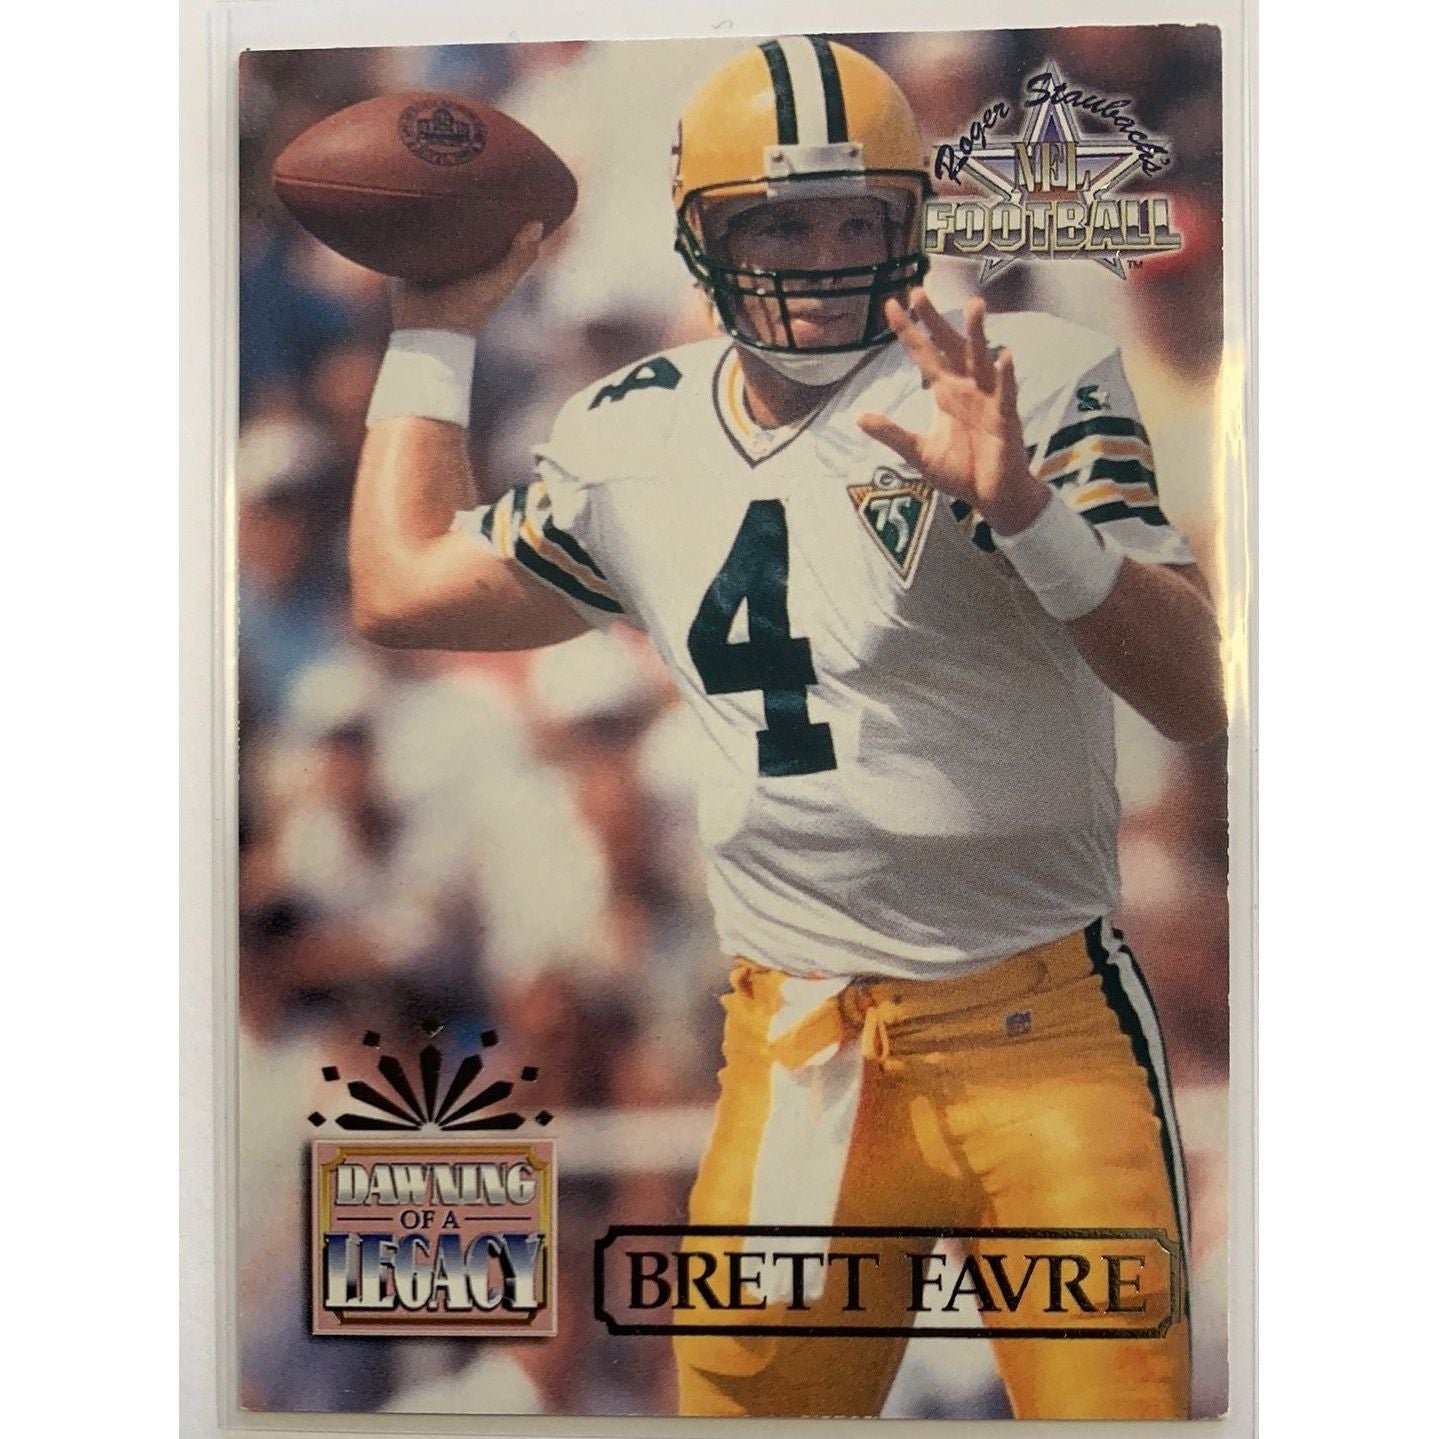  1994 Ted Williams Brett Favre Dawning of a Legacy  Local Legends Cards & Collectibles